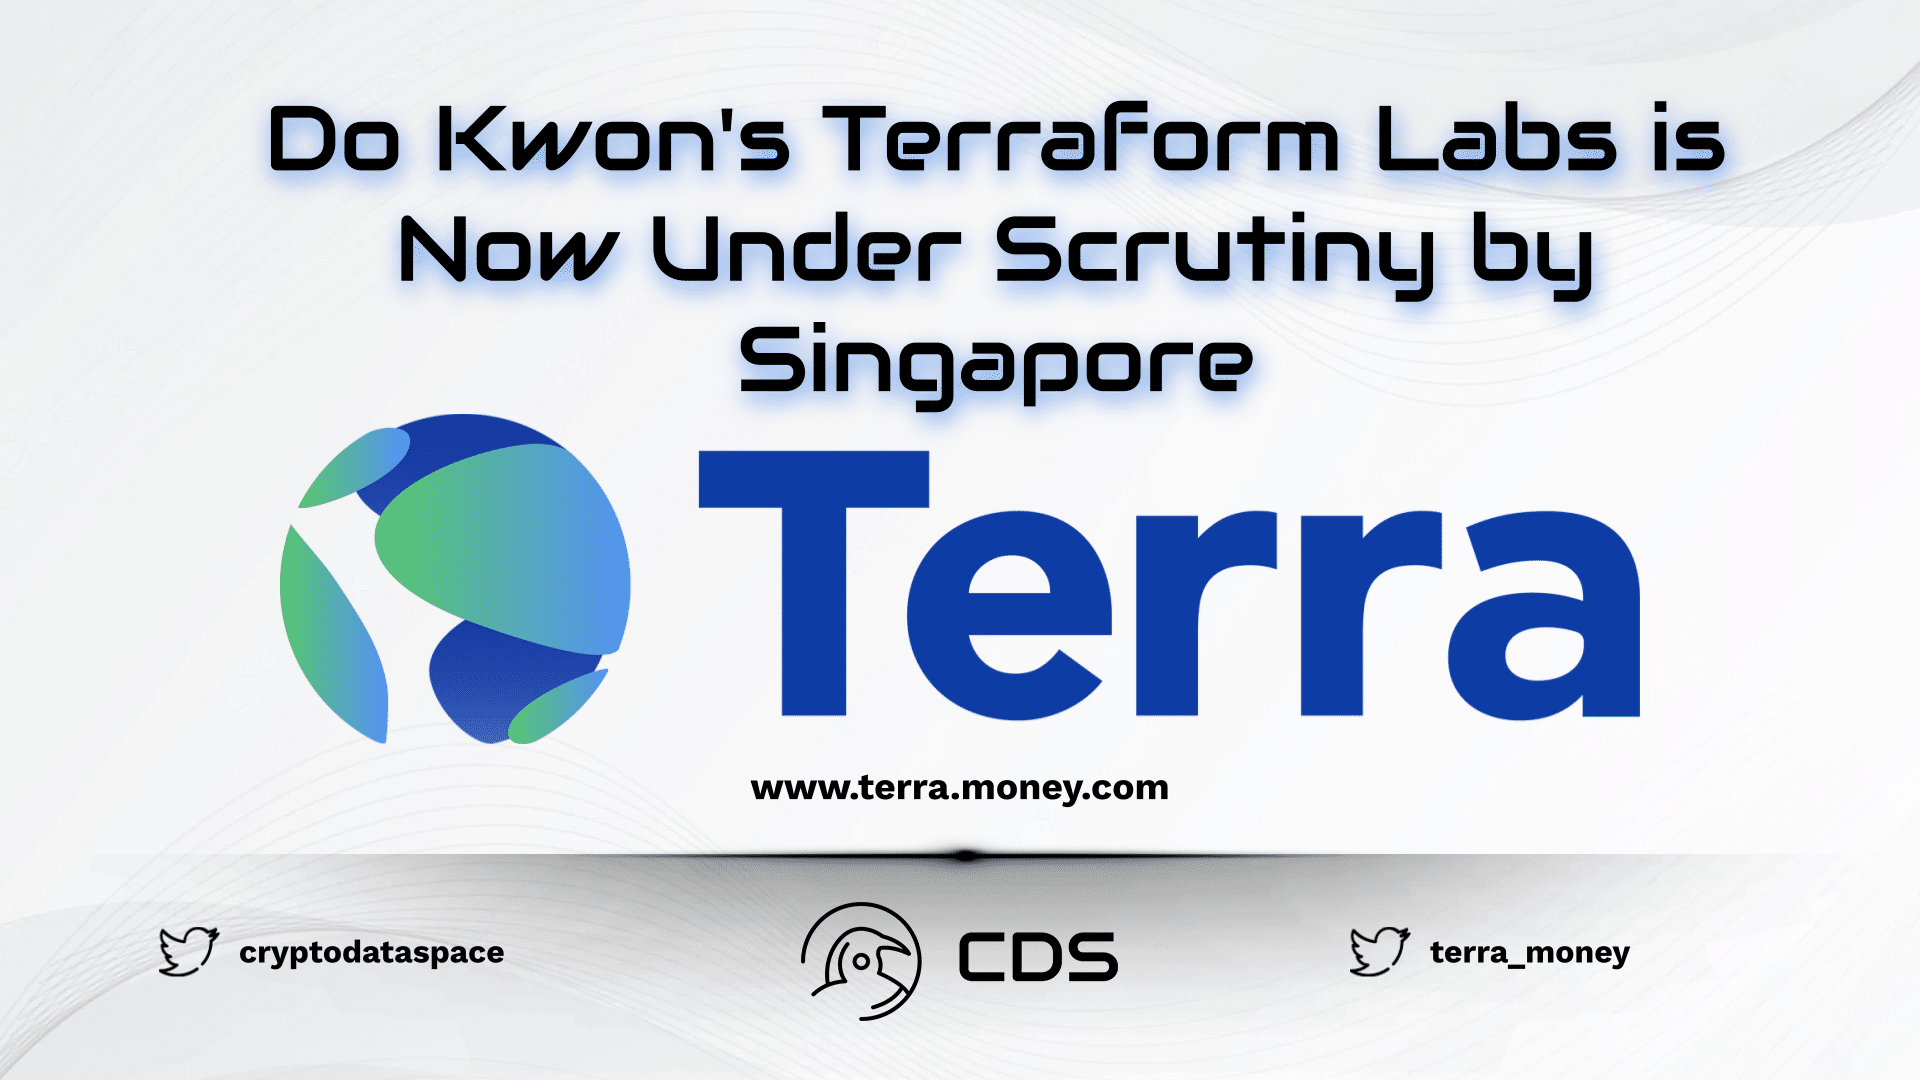 Do Kwon's Terraform Labs is Now Under Scrutiny by Singapore